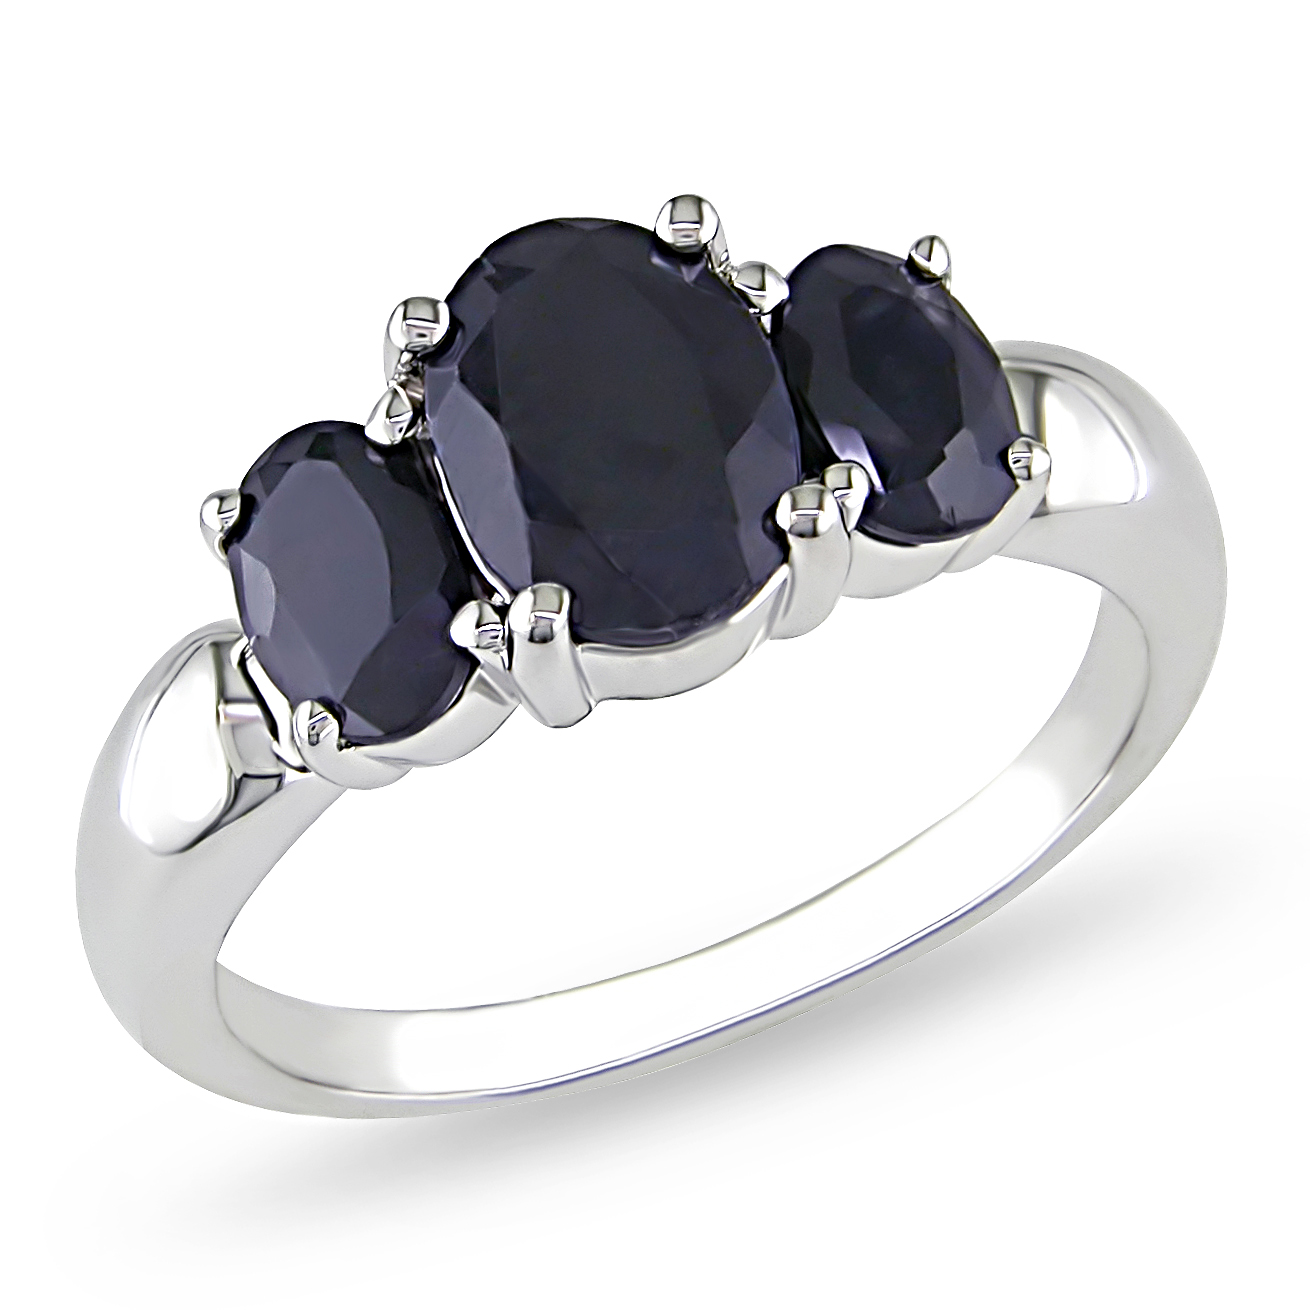 Amour 2 4/5 Carat T.G.W. Black Sapphire 3 Stone Ring in Sterling Silver